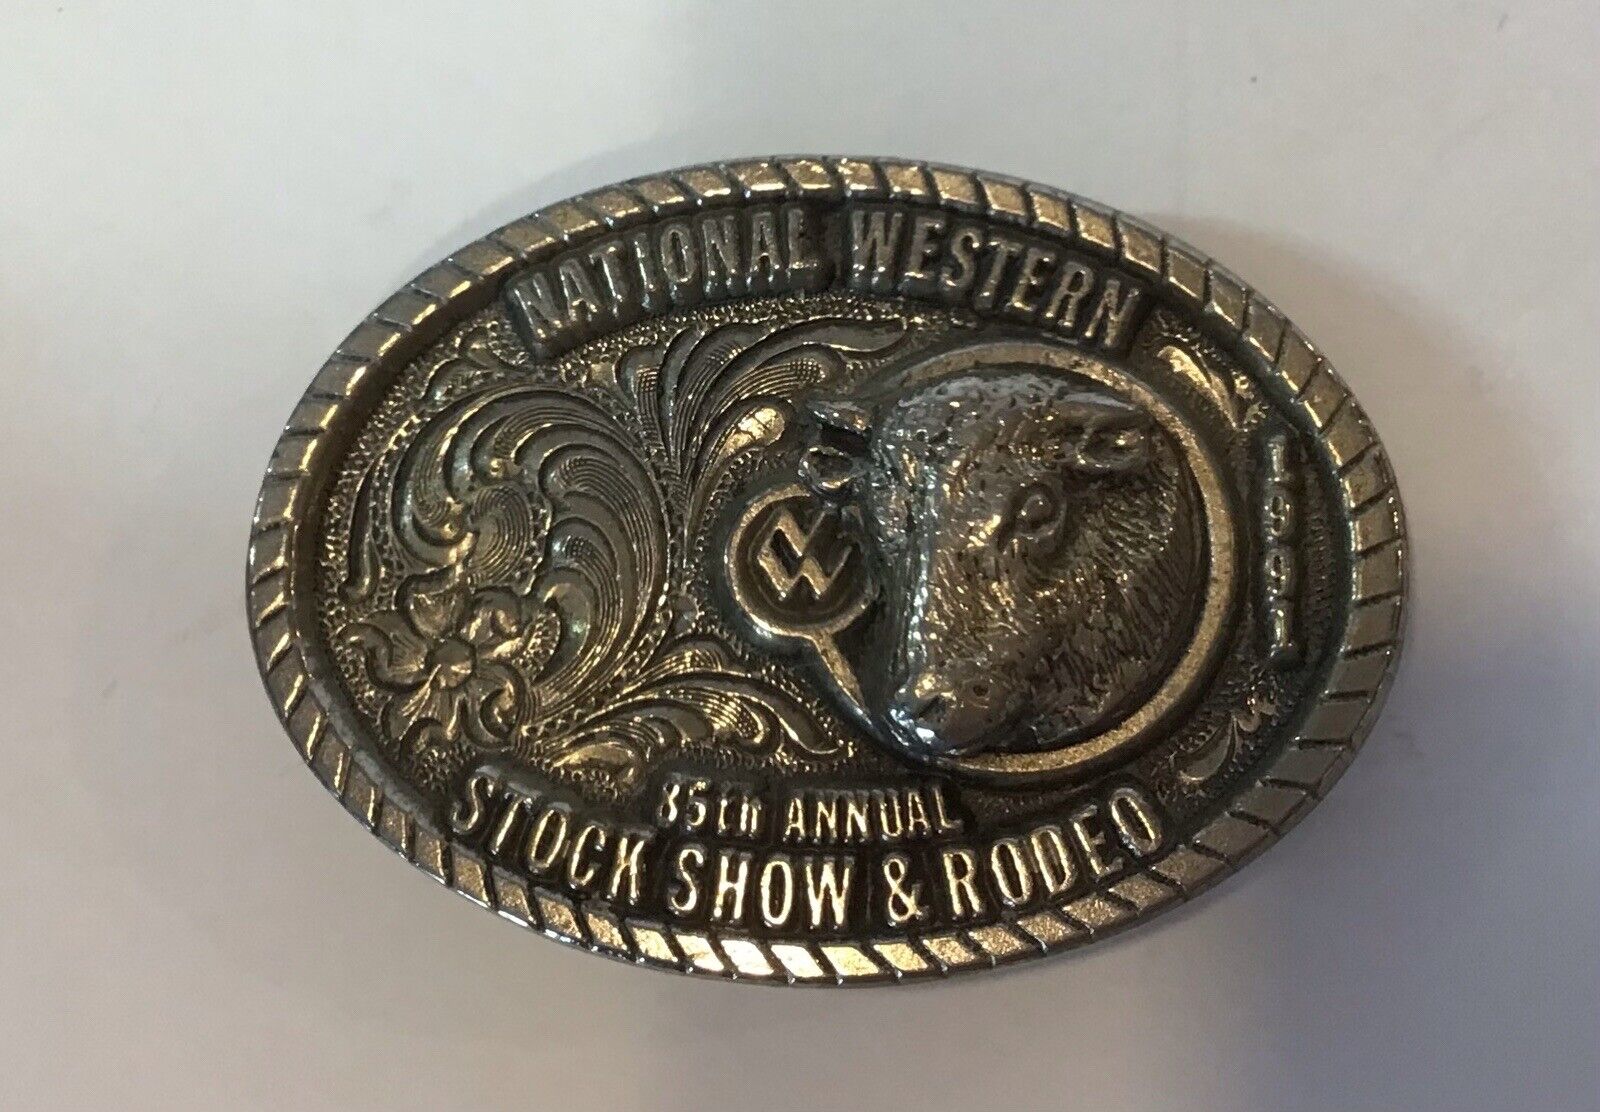 Vintage Western Buckle National Western Stock Show And Rodeo Denver 1991 #43/130